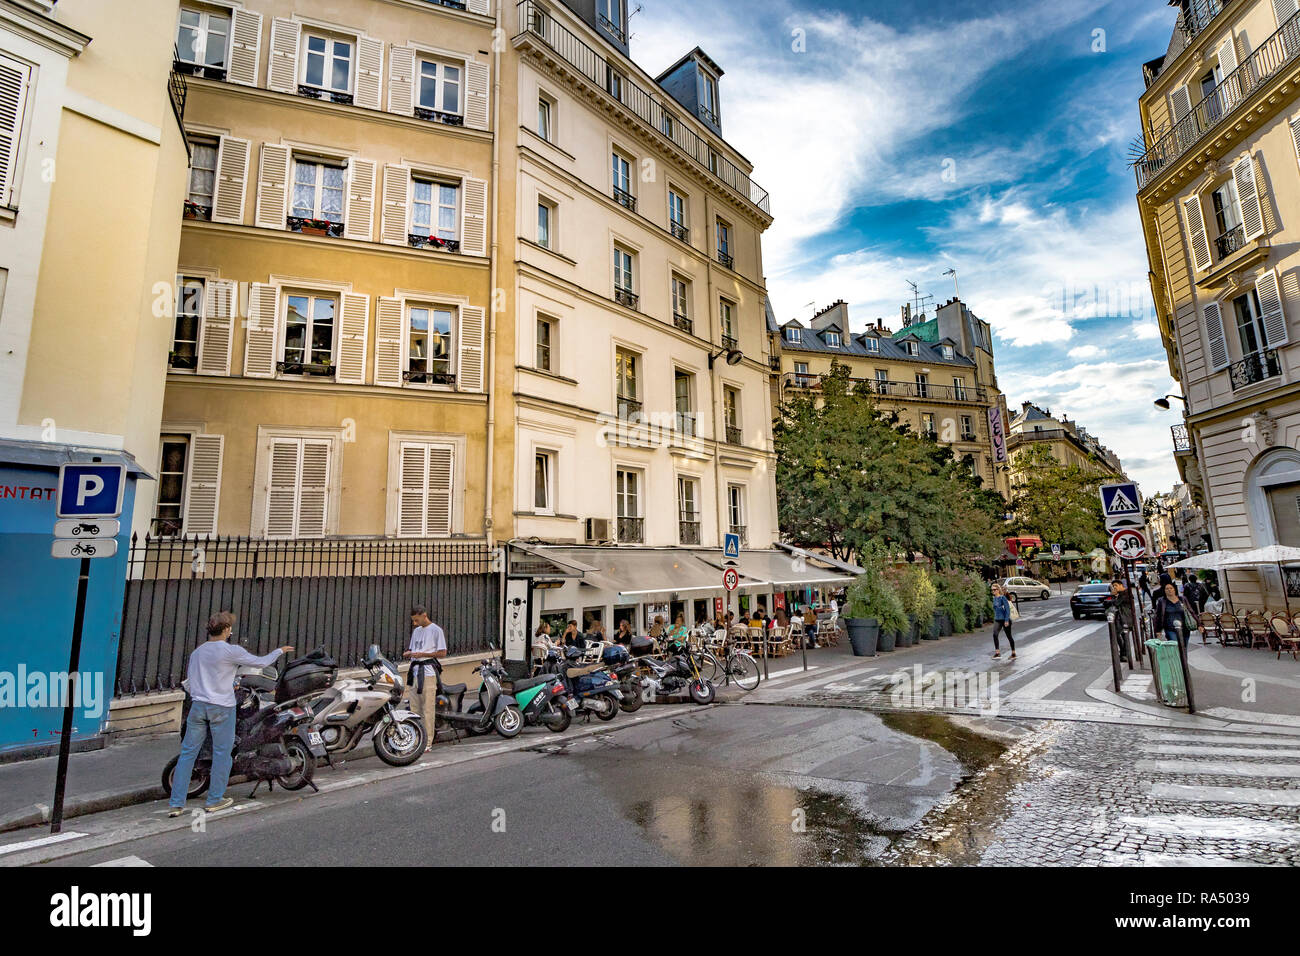 A man parks a Motor scooter near a busy restaurant whilst another man looks at his phone, along Rue de Douai,in ThePigalle area of Paris Stock Photo